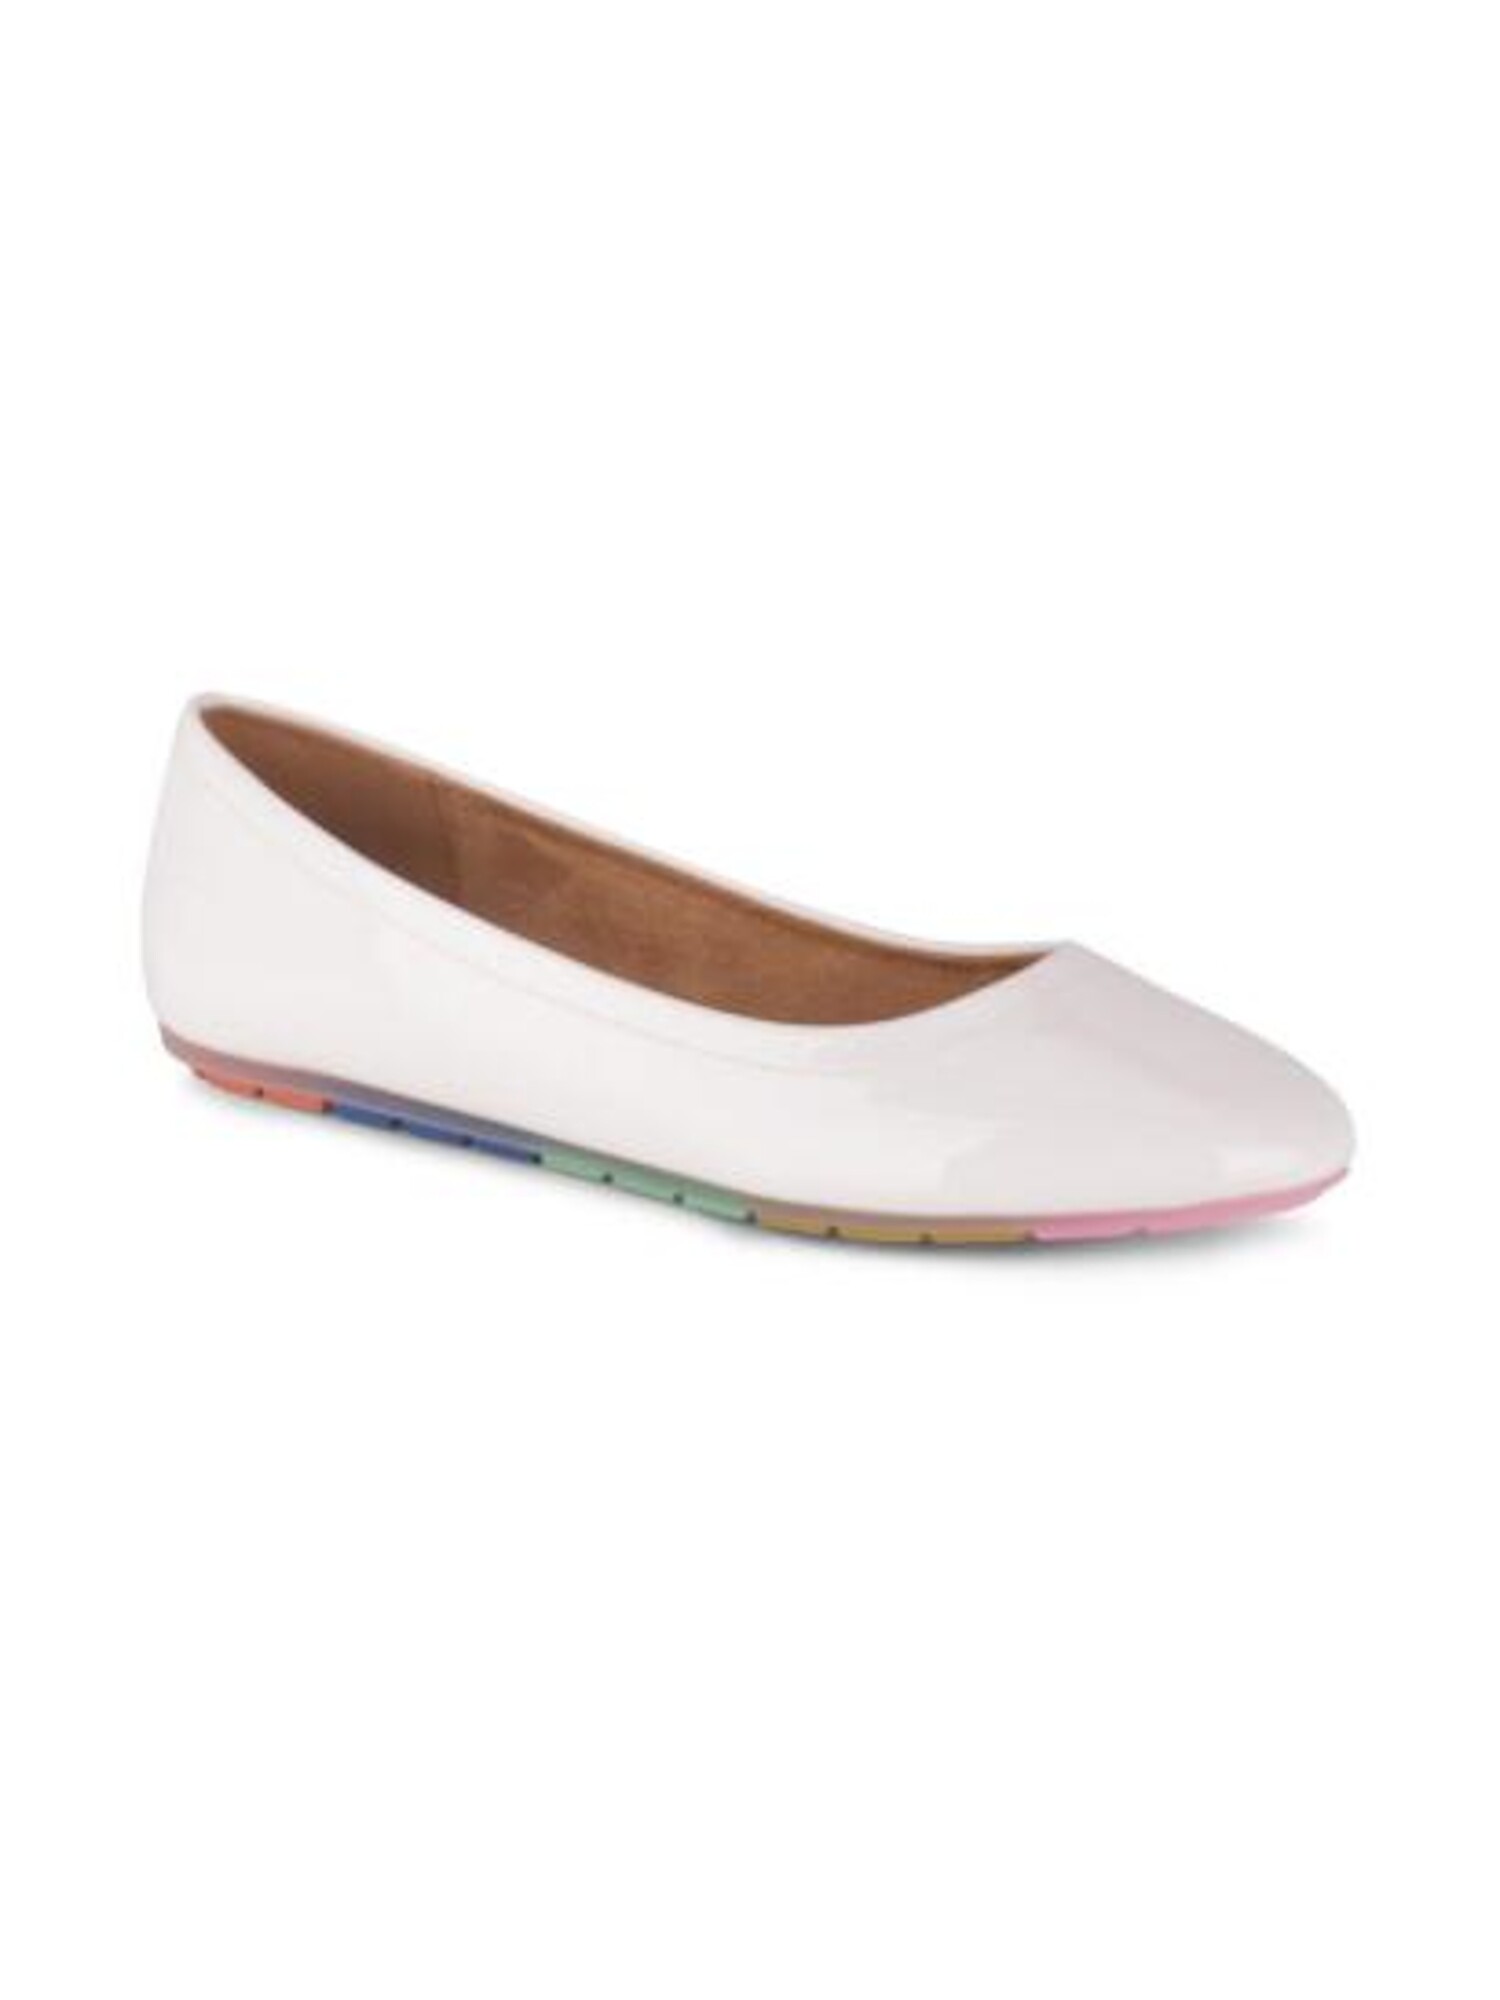 WANTED Womens White Rainbow Sole Padded Marlo Round Toe Slip On Ballet Flats 7